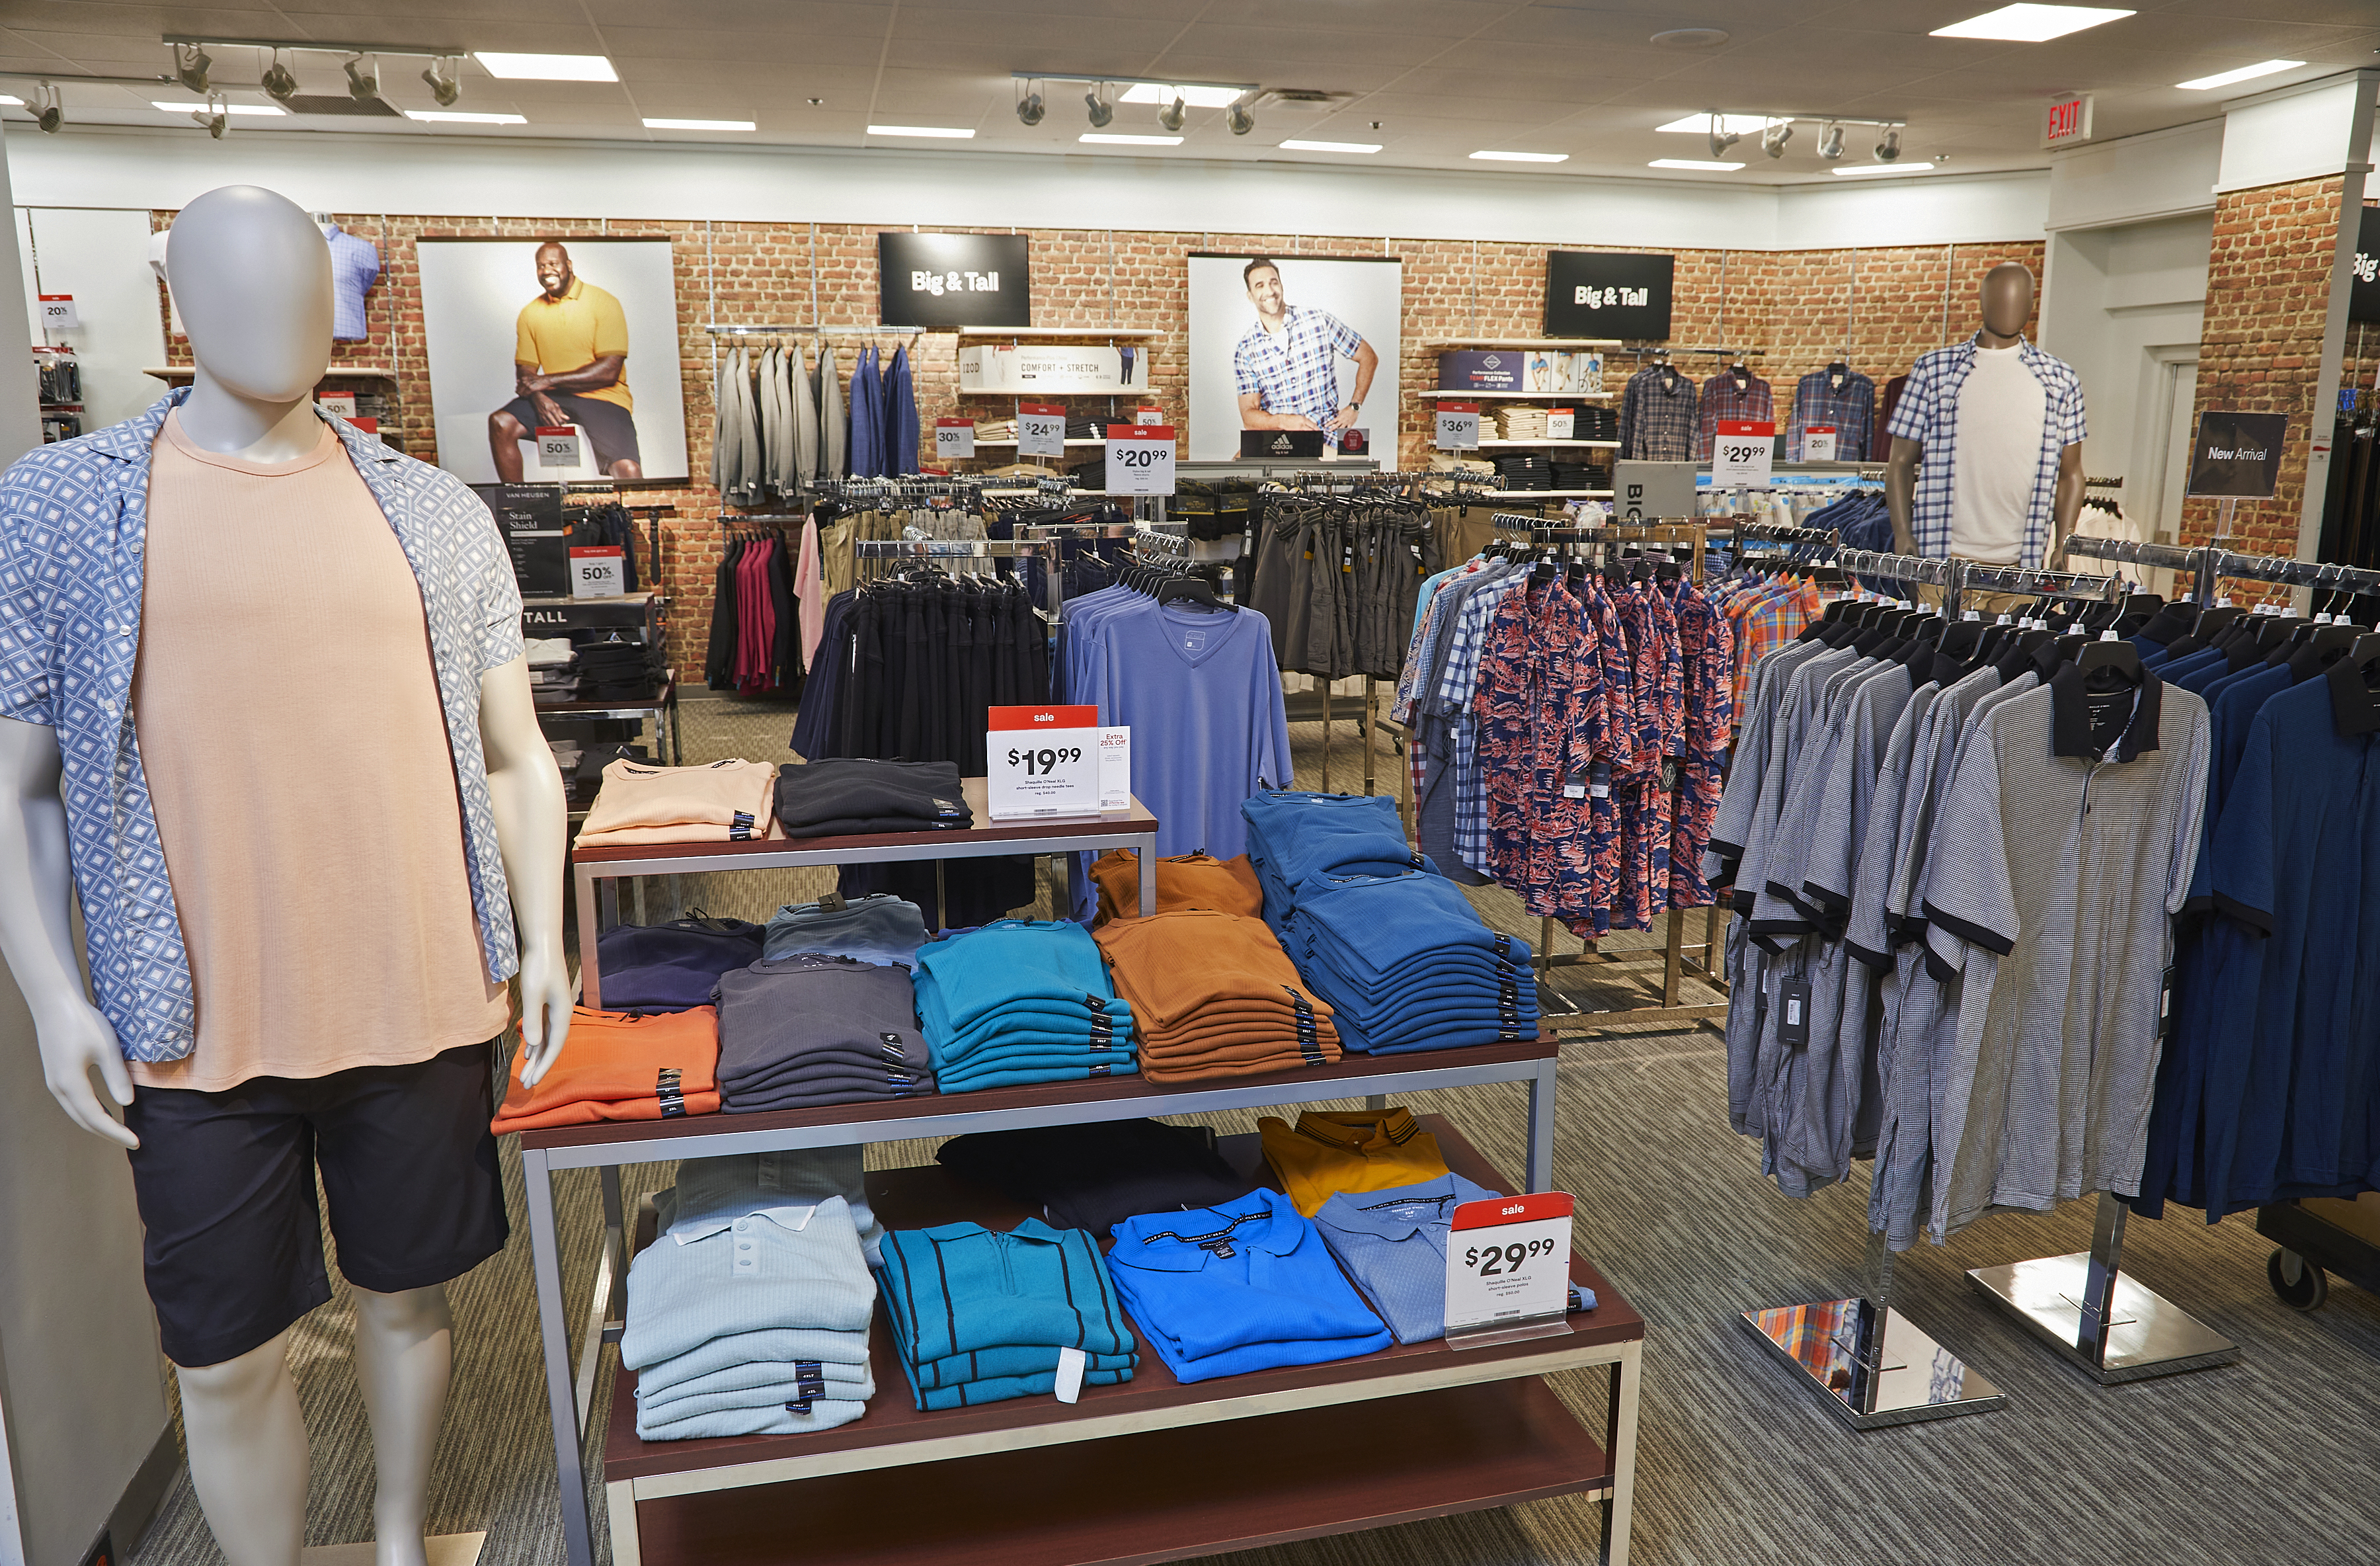 JCPenney at Woodland mall unveils results of $6 million, 6-month renovation  